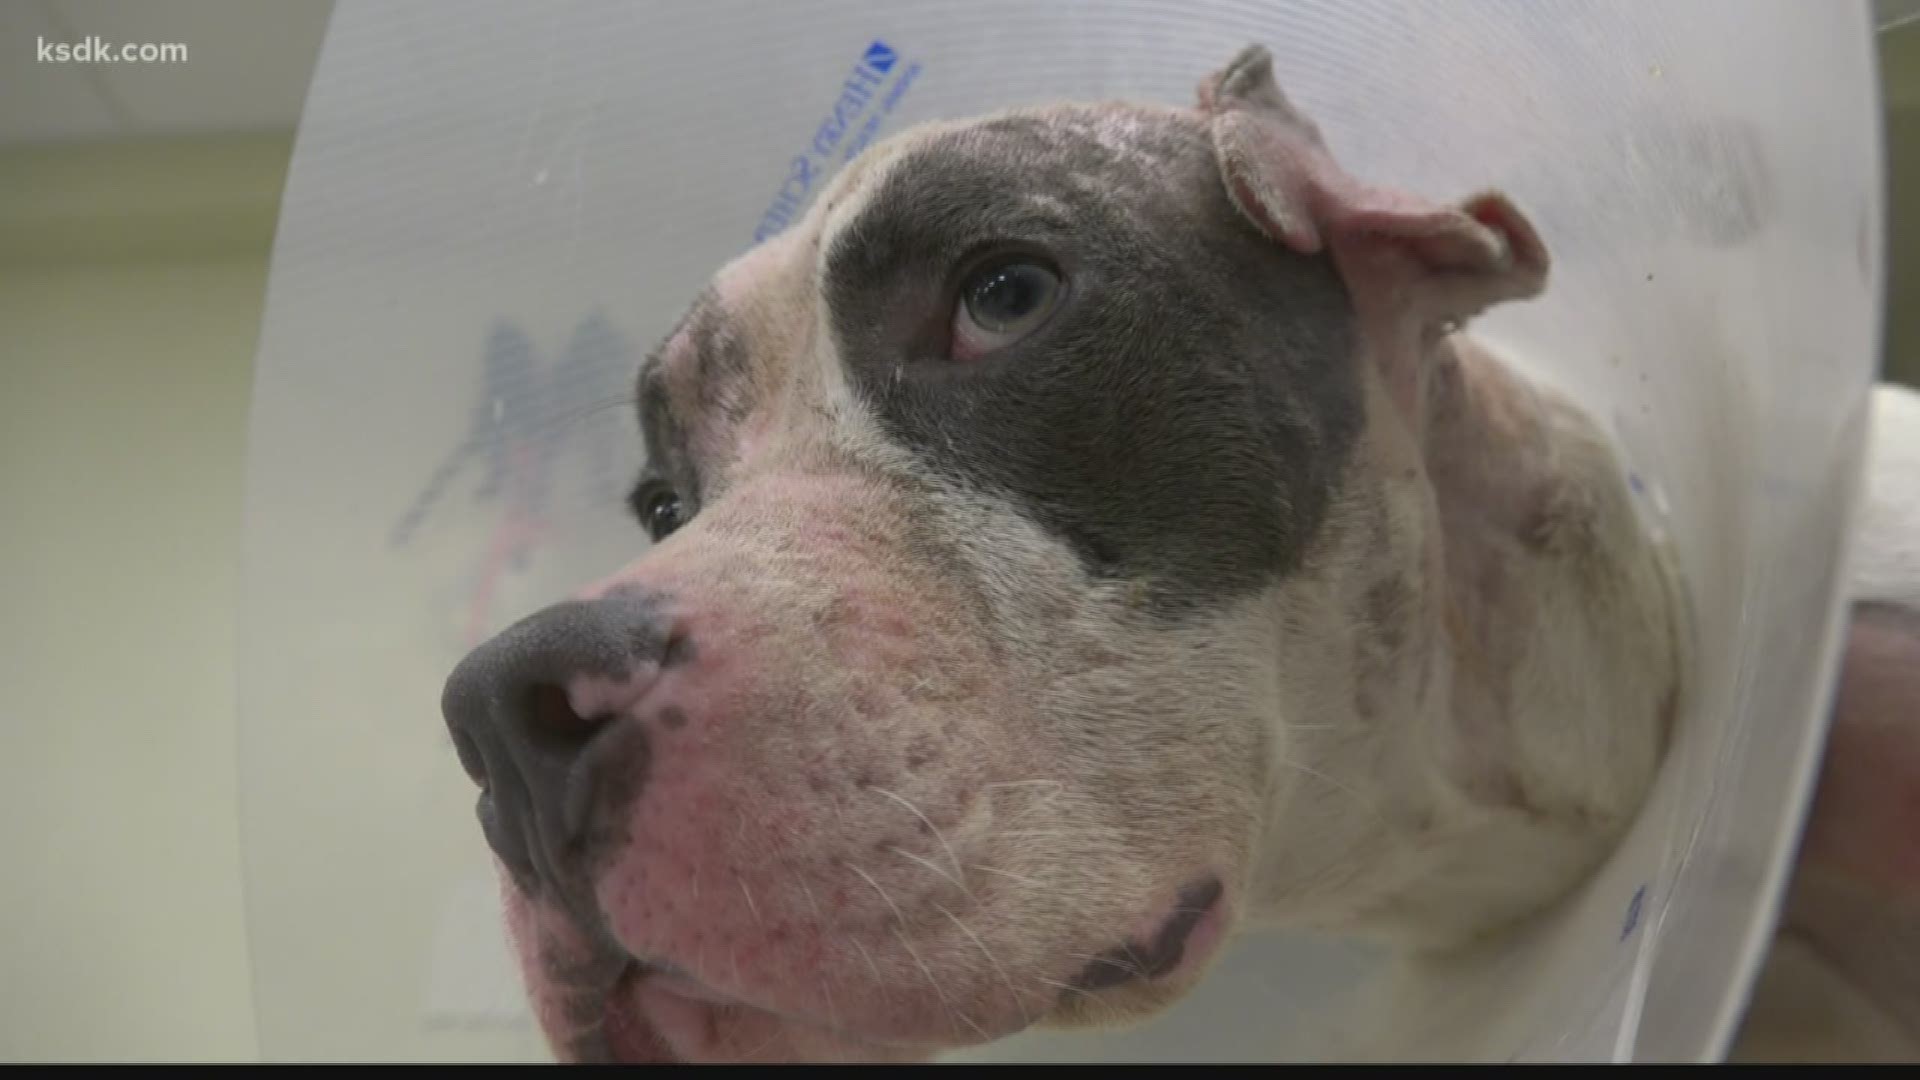 Covered in burns and crying at night, an animal abuse case caught the attention of a St. Louis rescue team and their followers online.